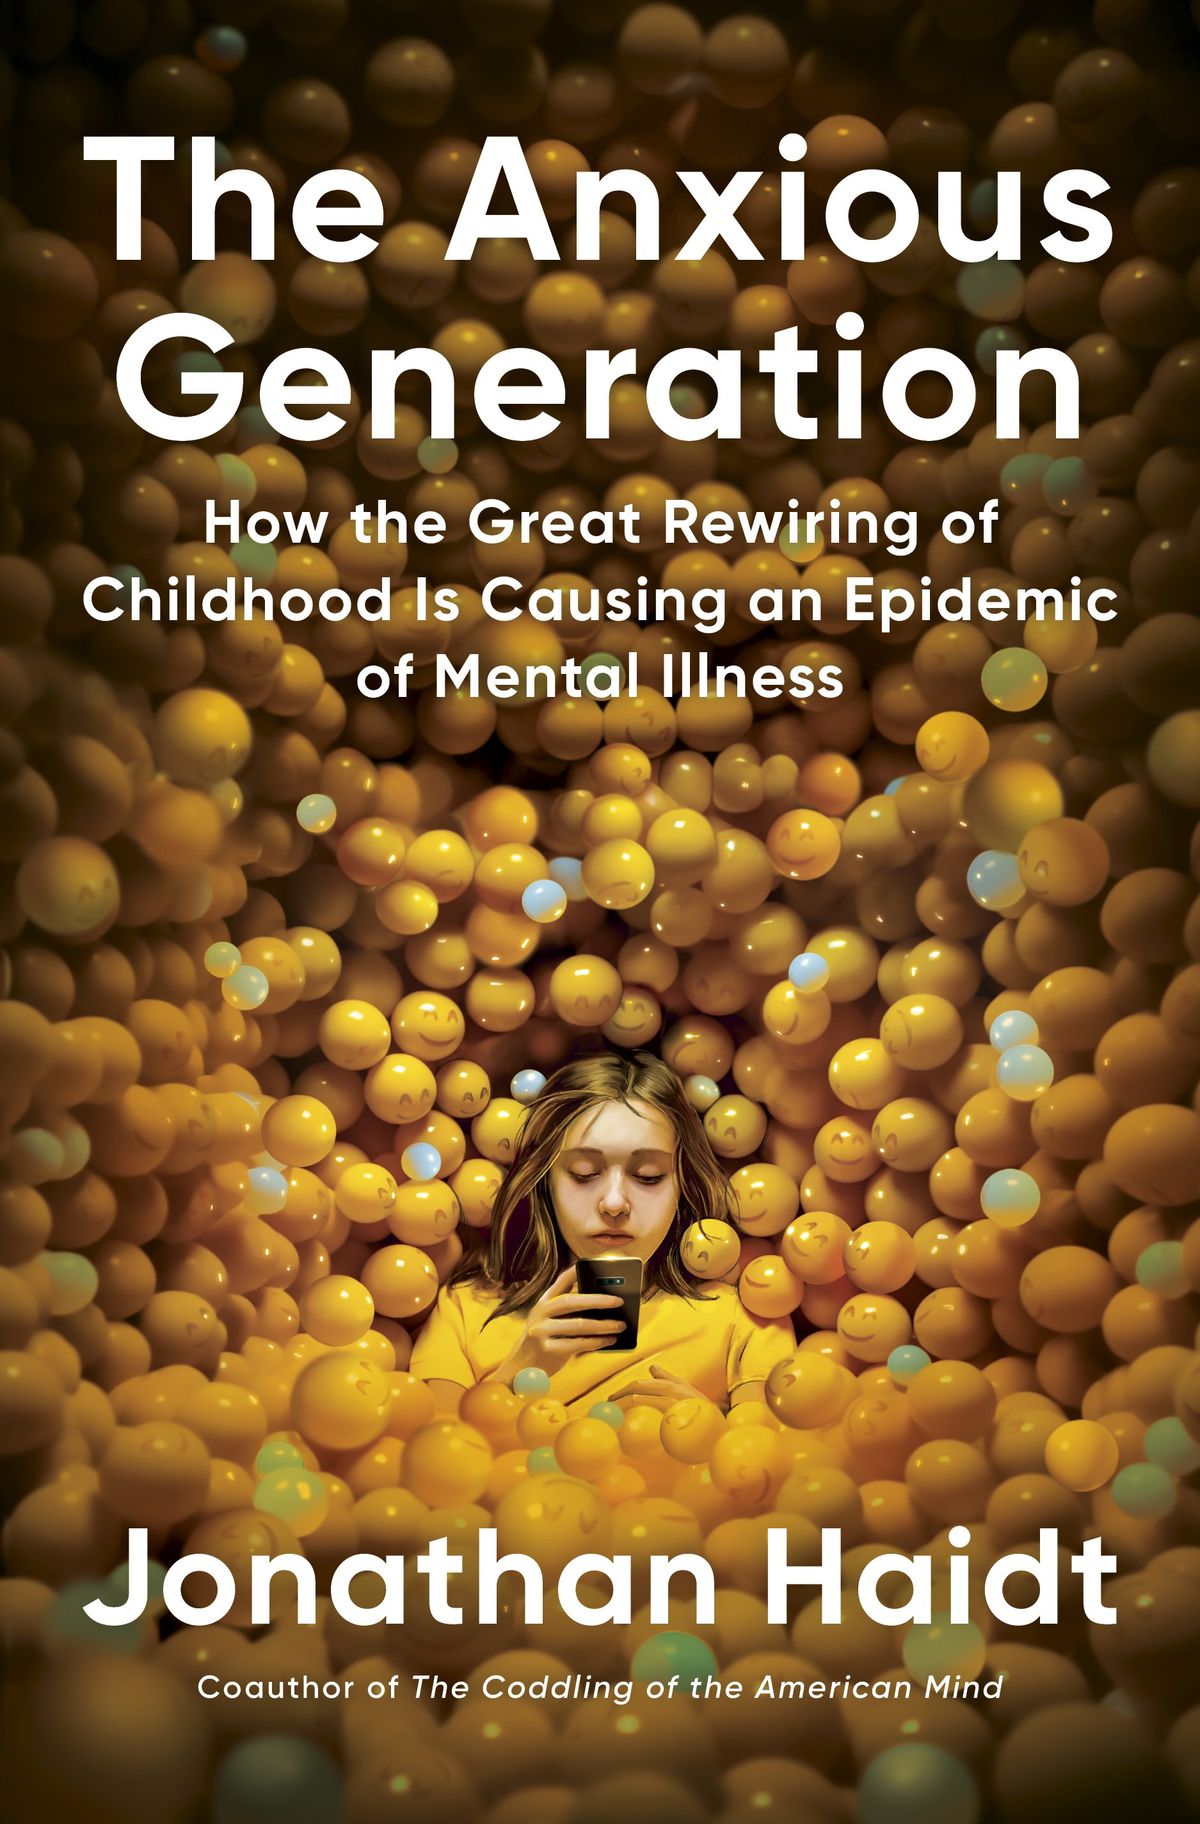 "The Anxious Generation: How the Great Rewiring of Childhood Is Causing an Epidemic of Mental Illness" by Jonathan Haidt. (Penguin Press/TNS)  (Penguin Press/TNS)